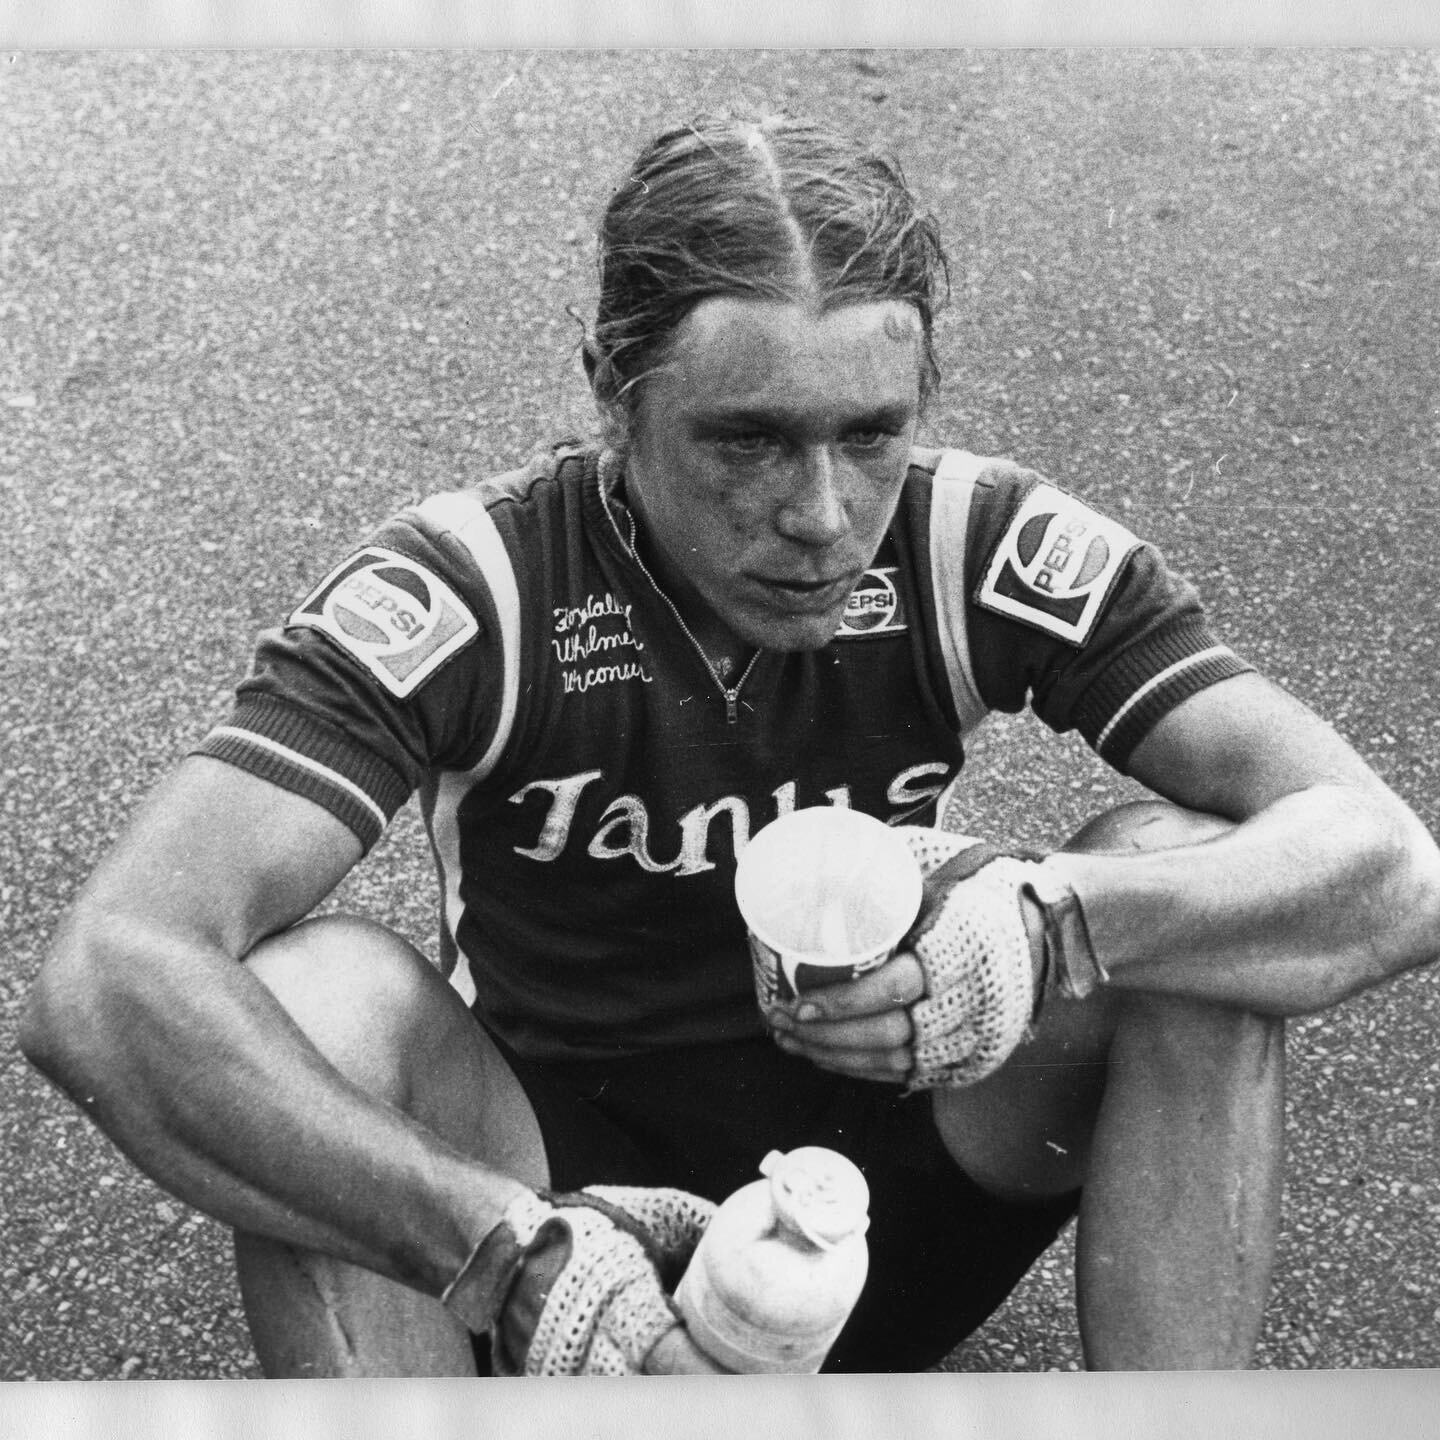 If 2020 had a face, it might look like Colin&rsquo;s after the 1979 Baul-Mich, his first race as a Cat 2.